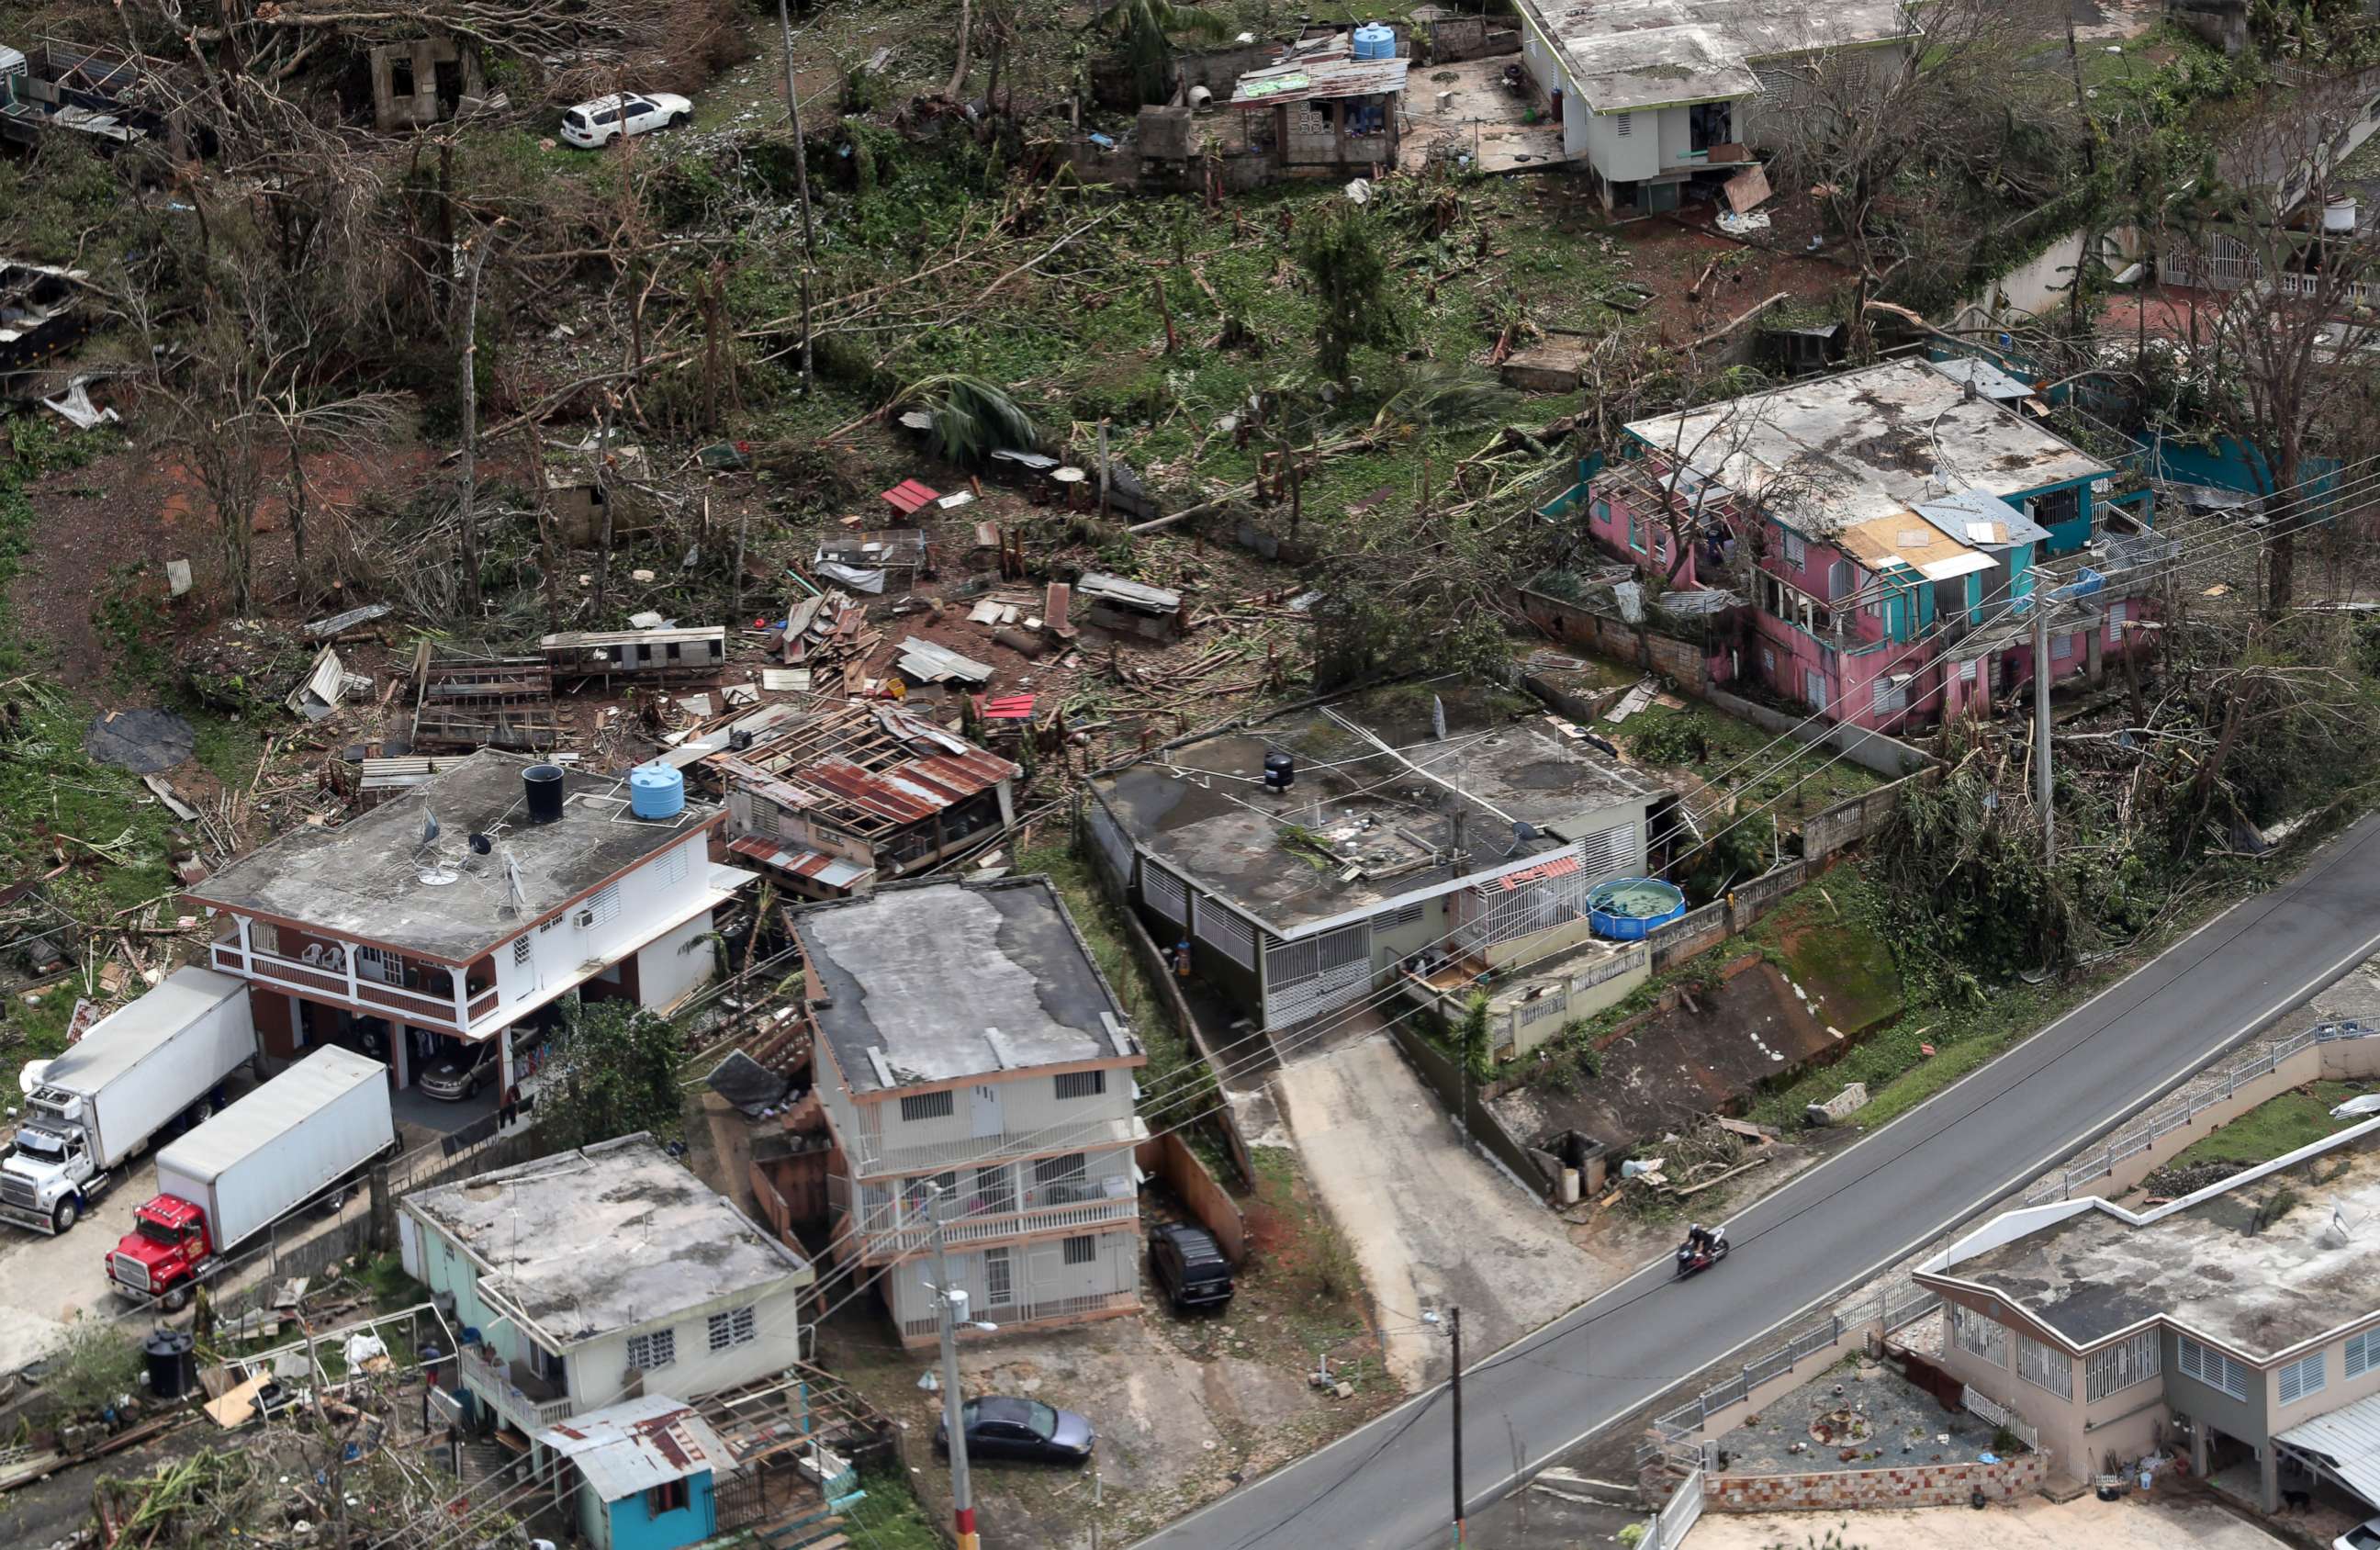 An aerial image showing the damage done to the Morovis area of Puerto Rico three days after hurricane Maria passed through the island on Sept. 20, 2017.